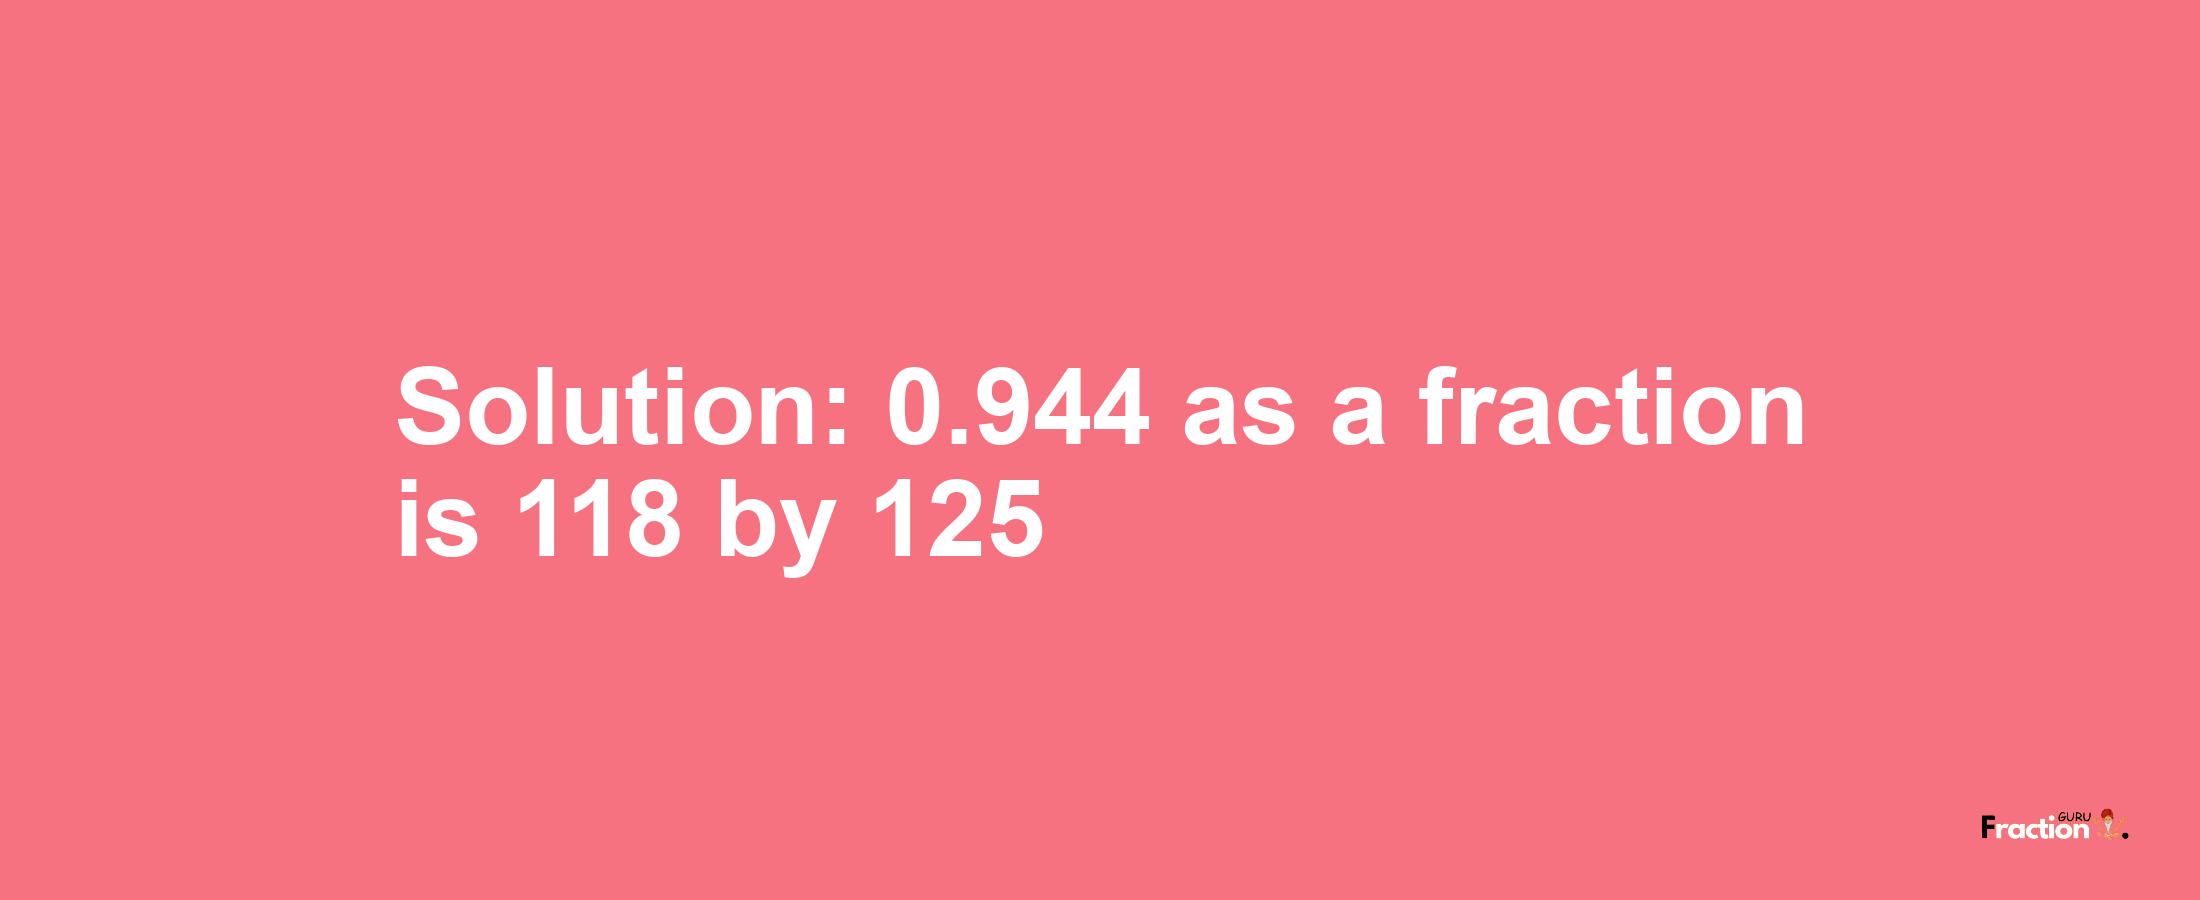 Solution:0.944 as a fraction is 118/125